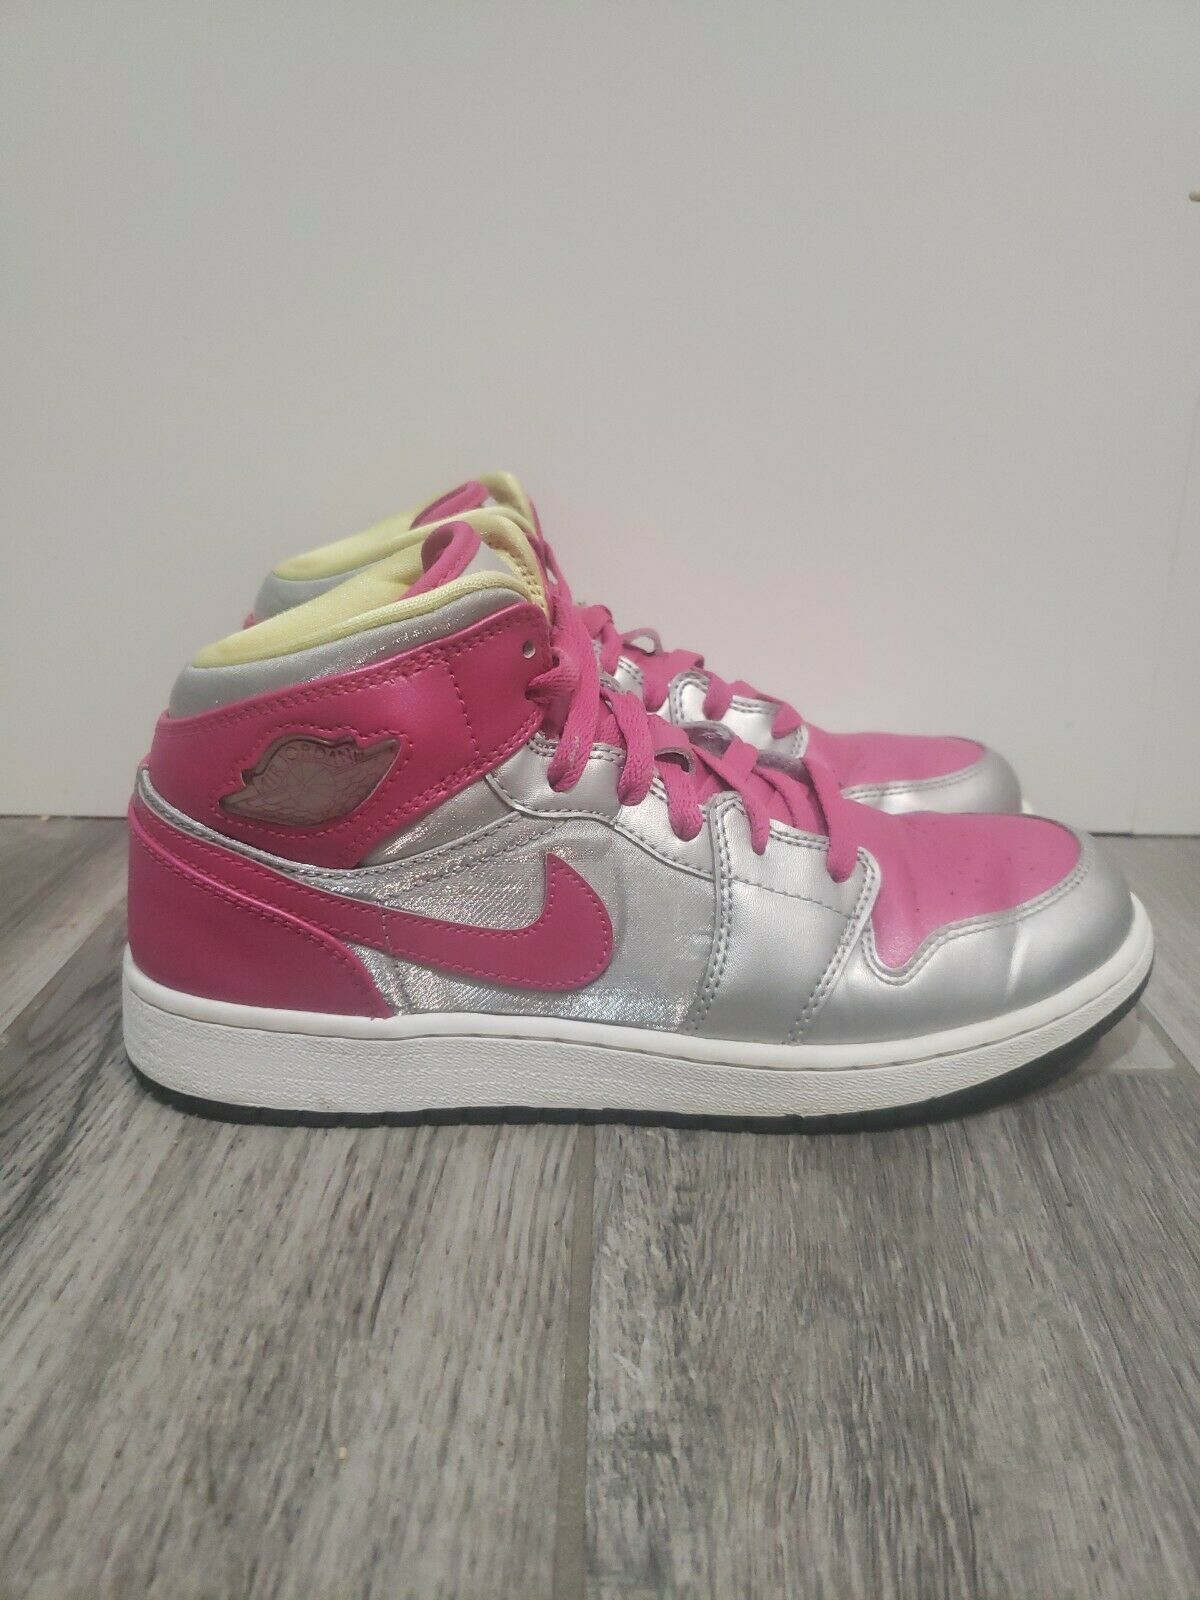 Nike Air Jordan 1 Retro Mid GS Shoes Pink & Silver Youth 555112-037 Size 7Y